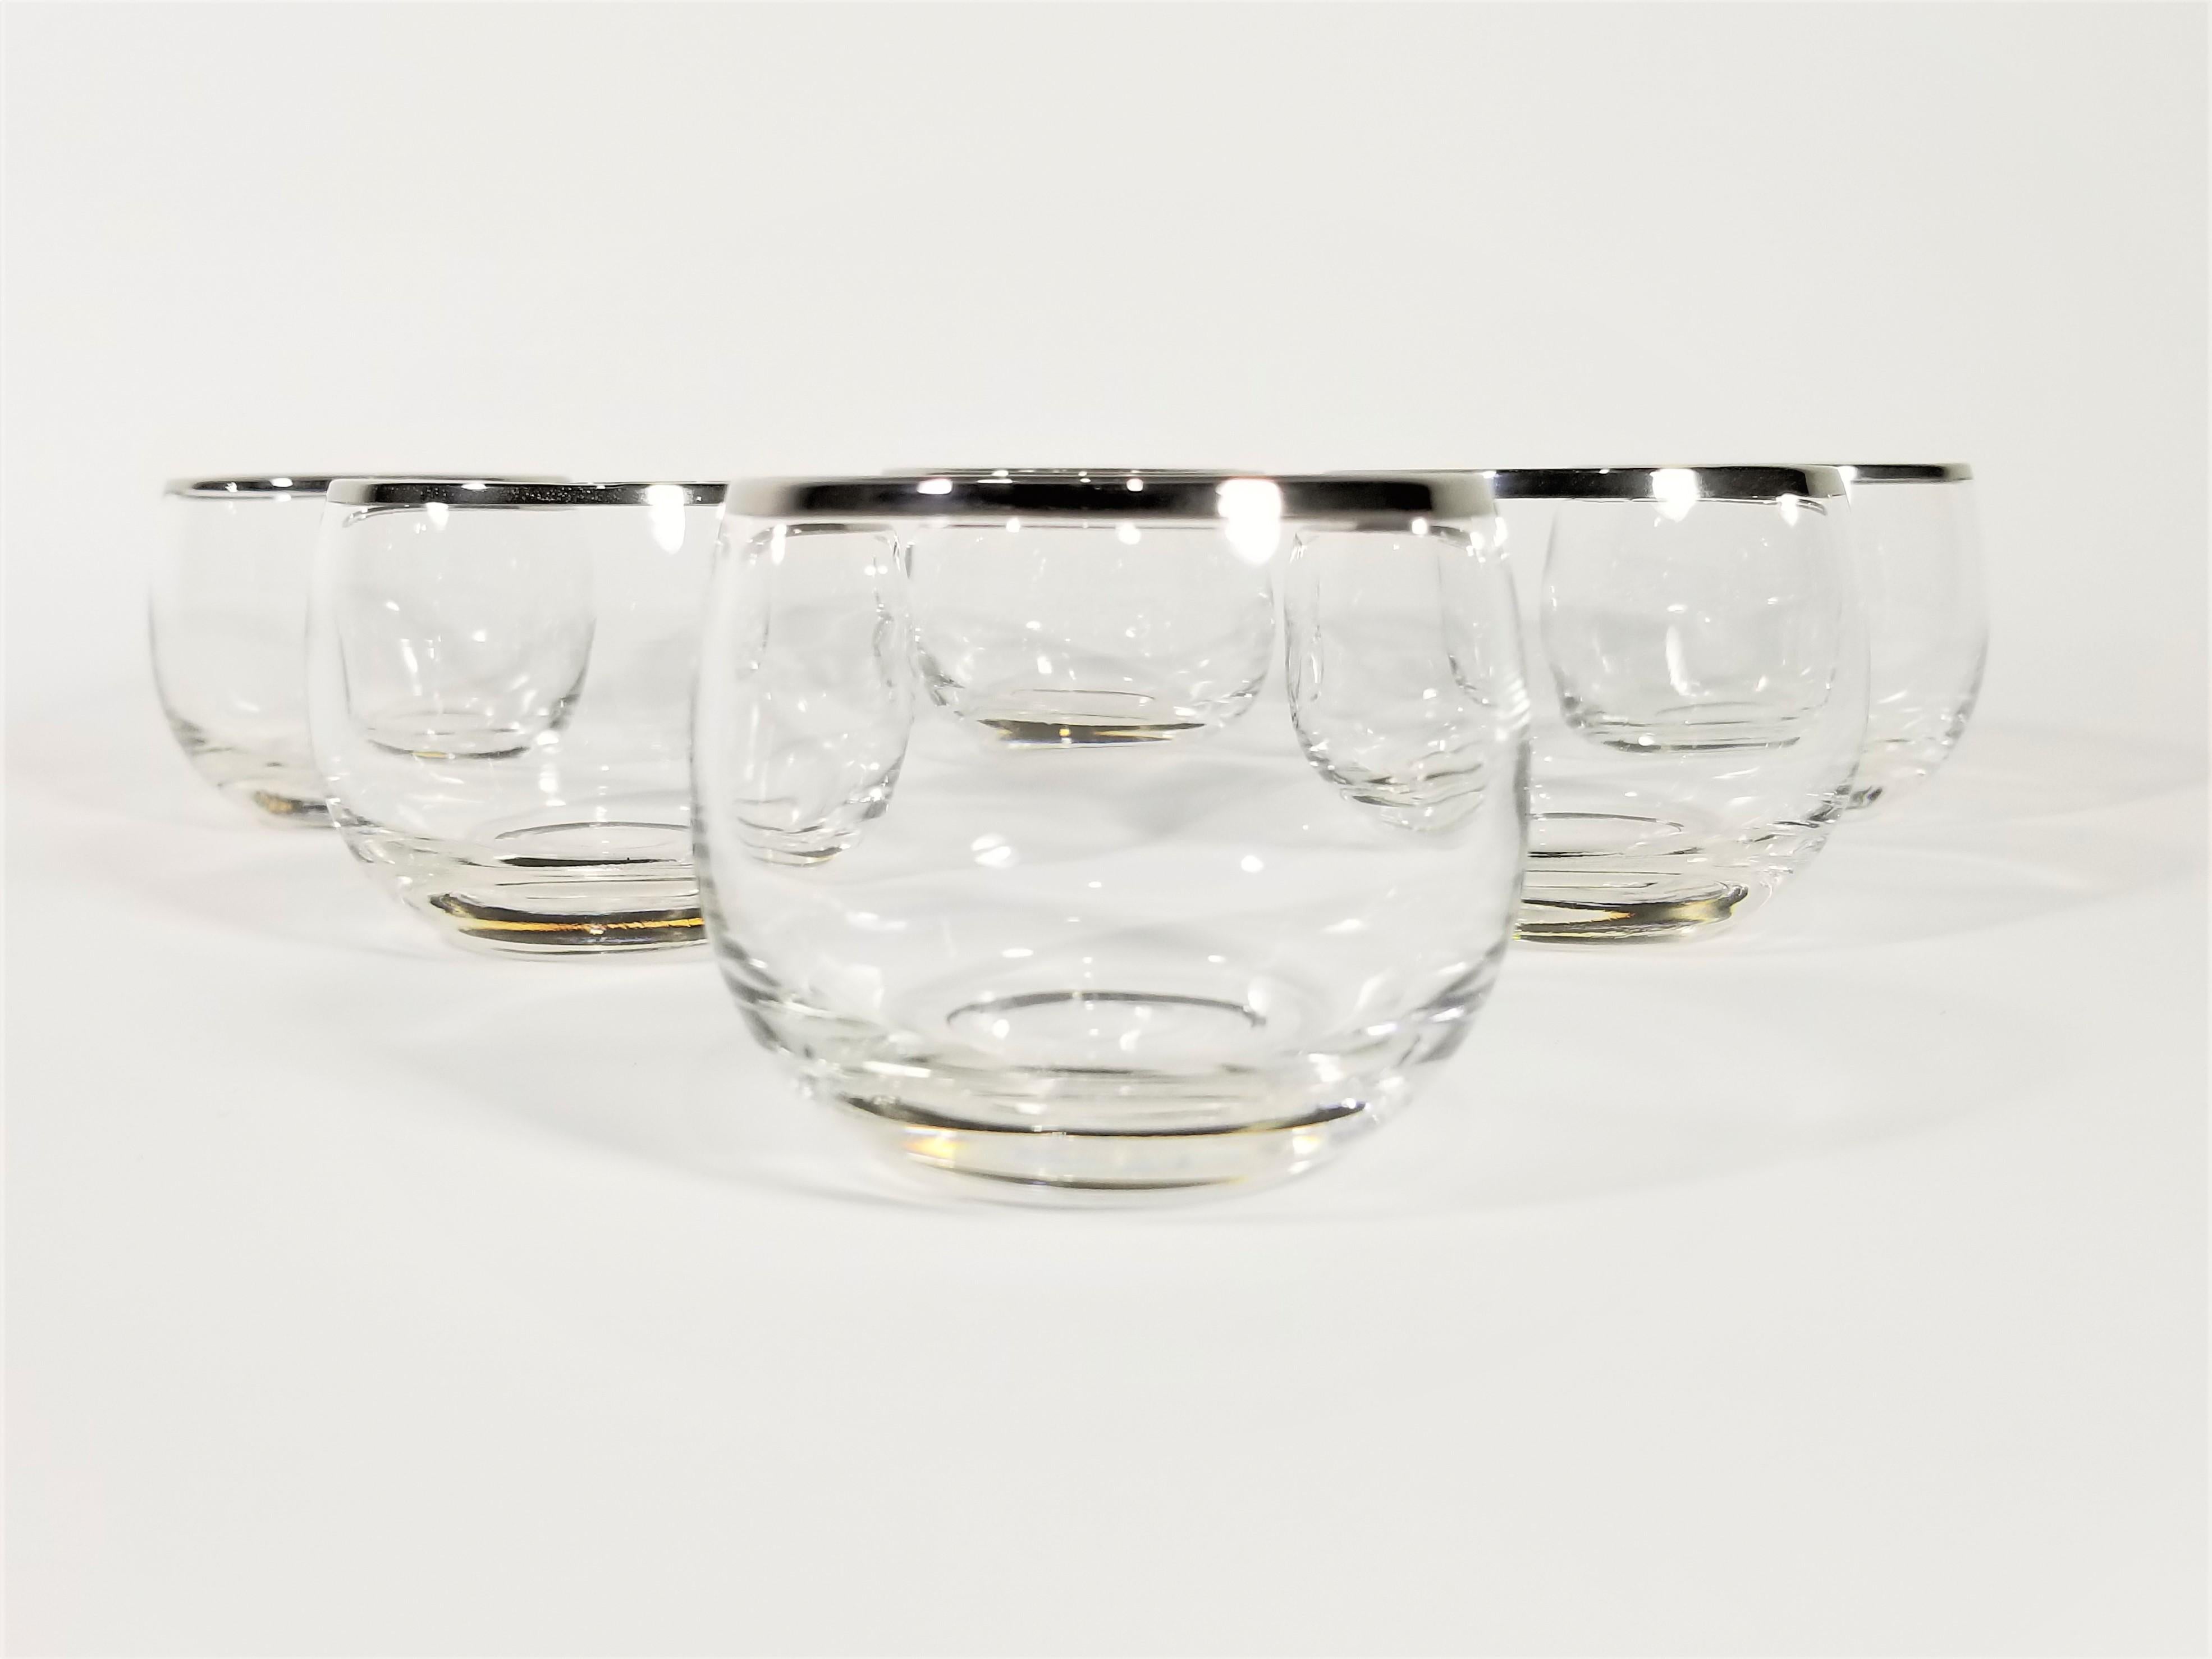 Midcentury 1960s set of 6 Dorothy Thorpe silver rimmed glasses. Often referred to as roly poly glasses due to their round modern shape. These are the petite version. Perfect for small spaces, small home bar or bar cart.

   